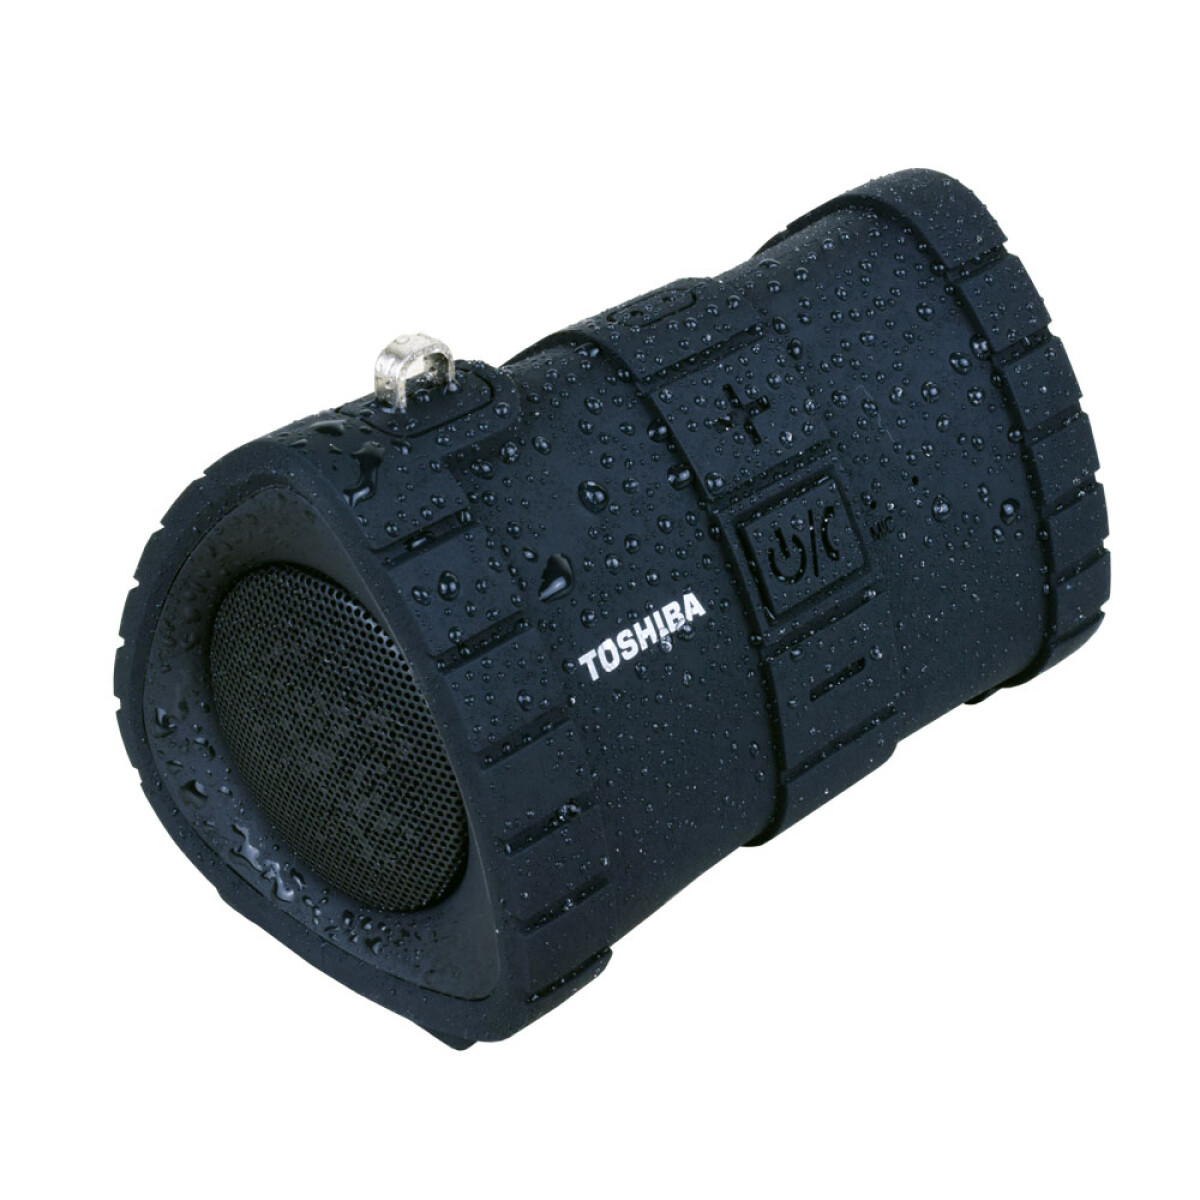 REPRODUCTOR BT TOSHIBA WATER PROOF WSP100 NEGRO 